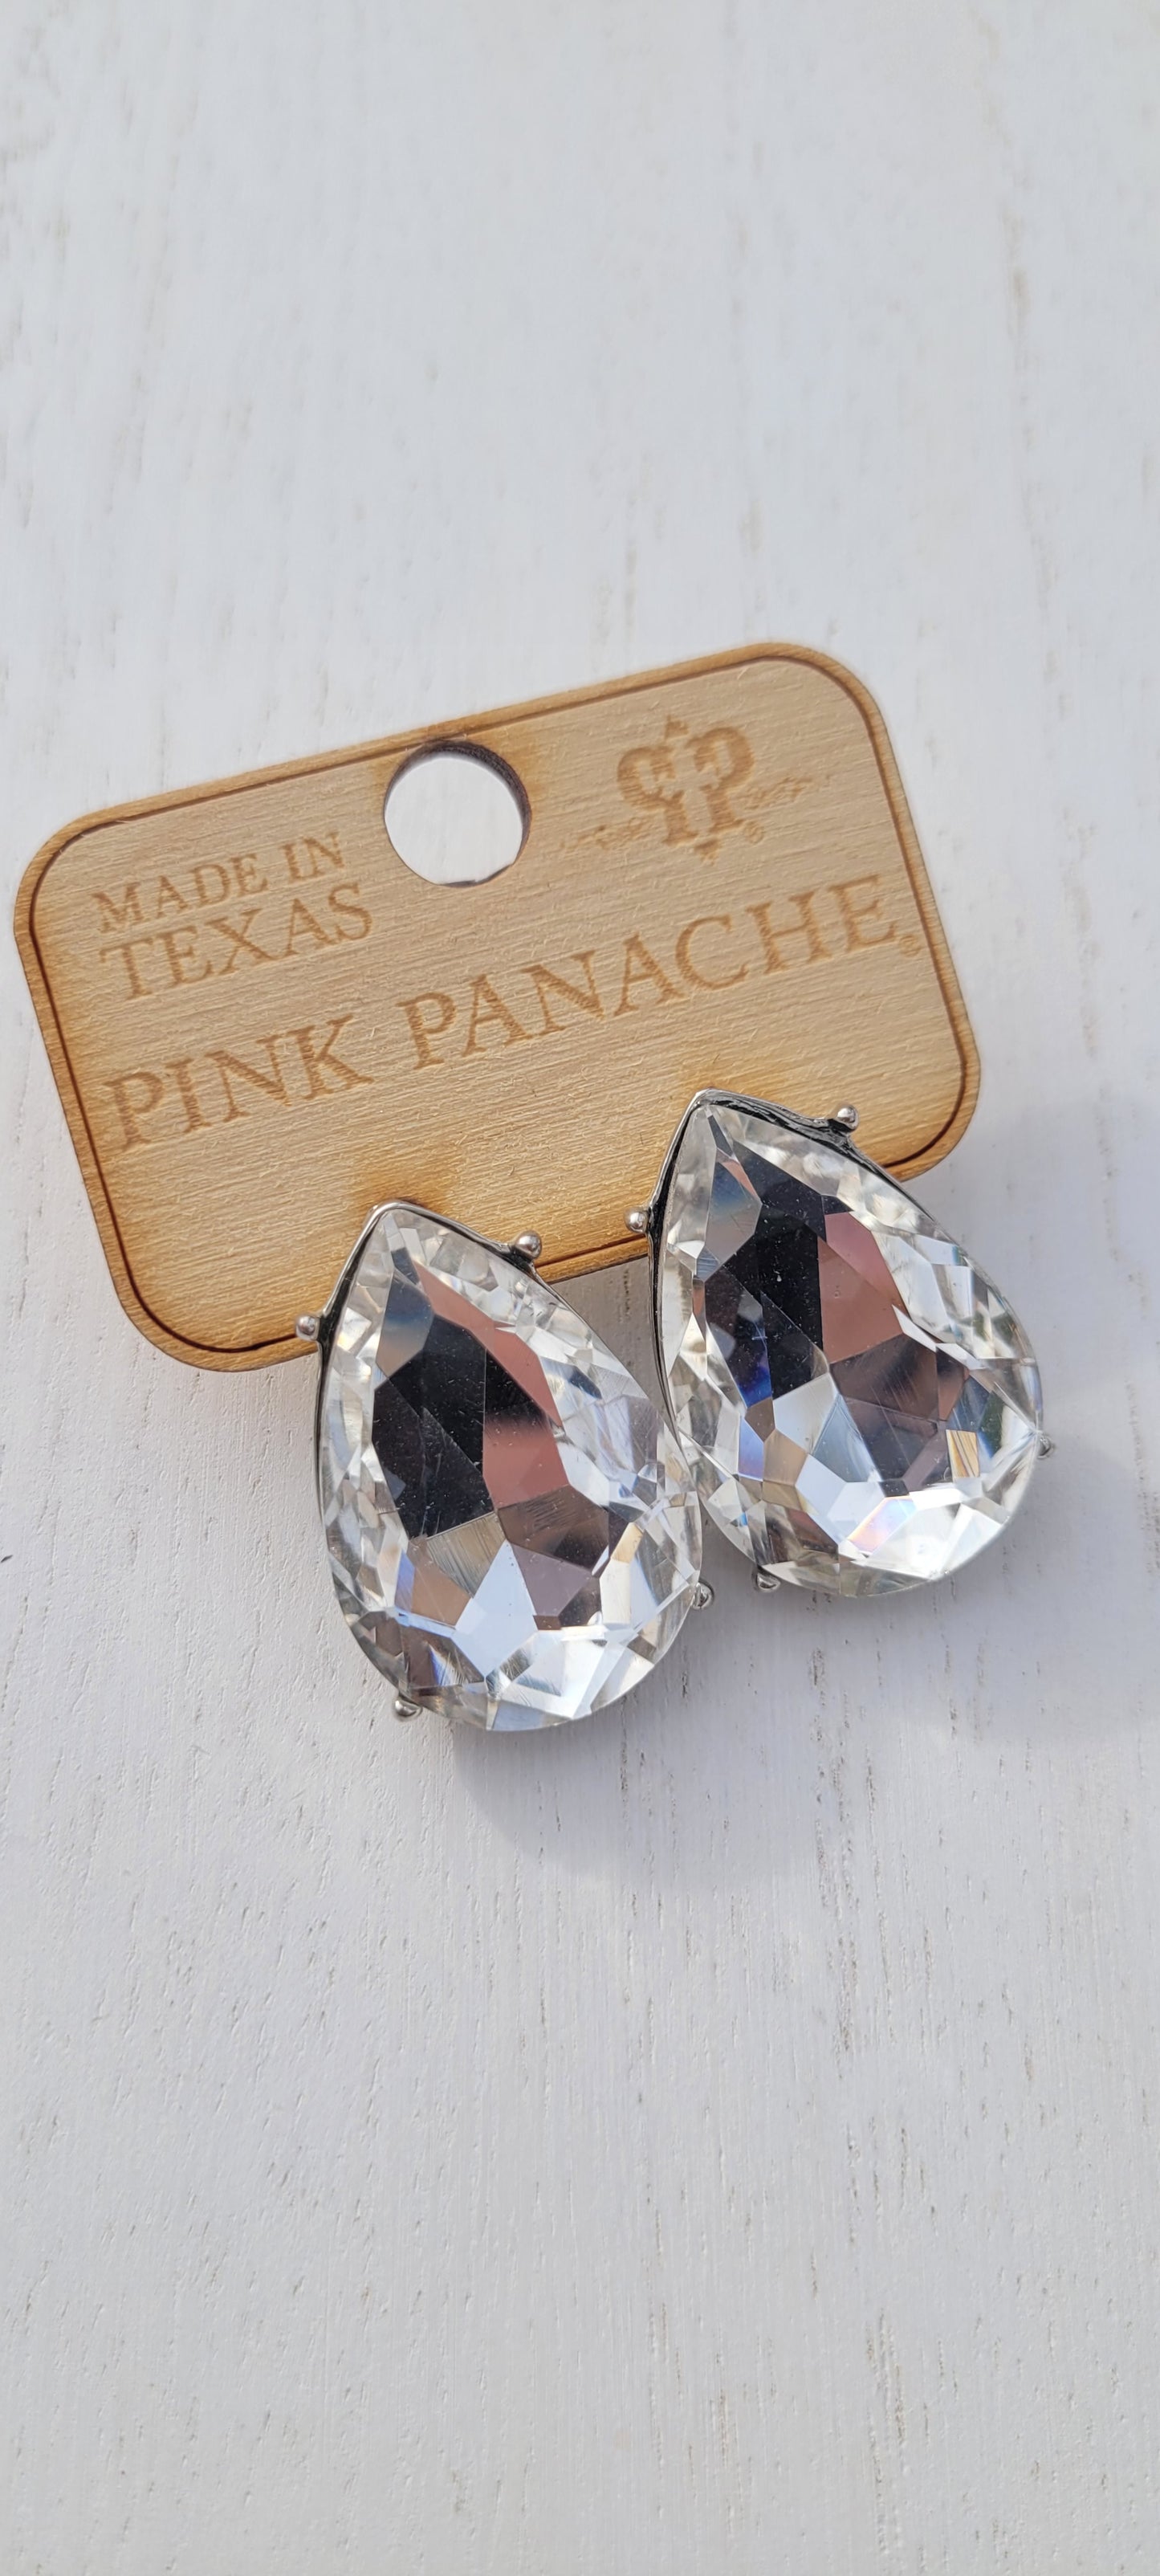 Pink Panache Earrings Color: Large clear pear shape post earring Limited supply!  